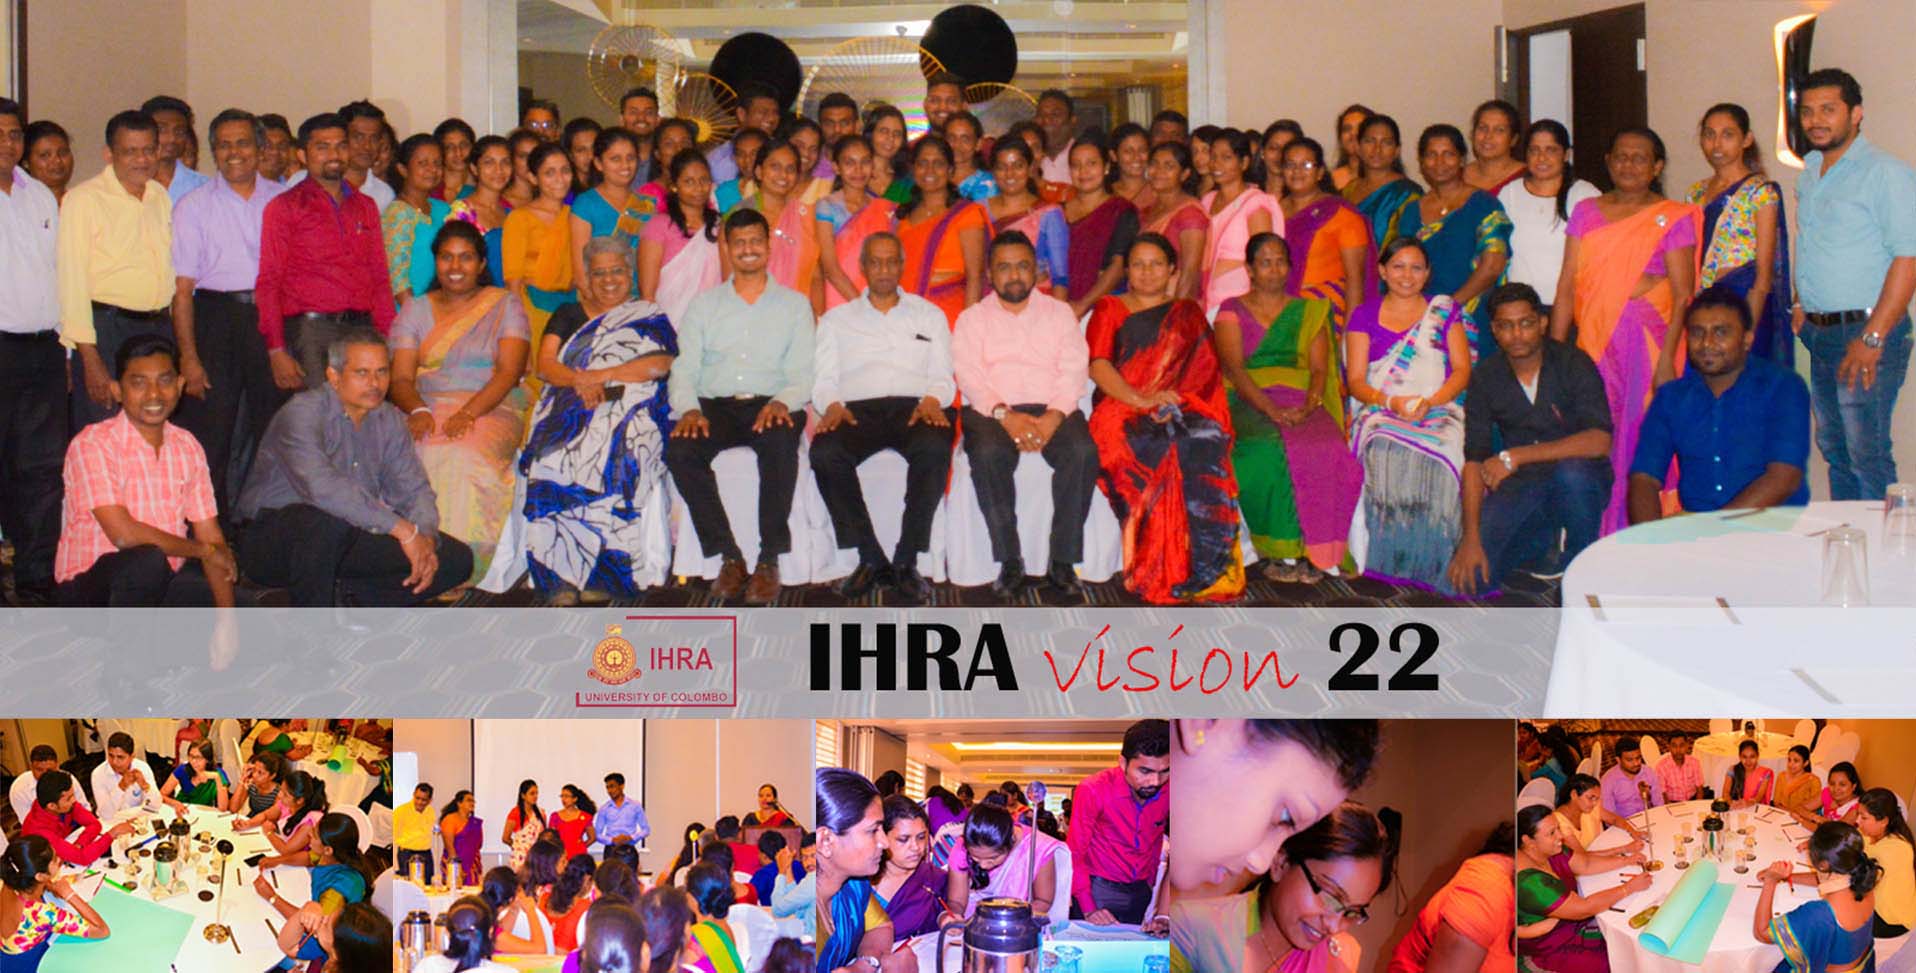 IHRA Vision 22: Envisaging future together, reaching it together